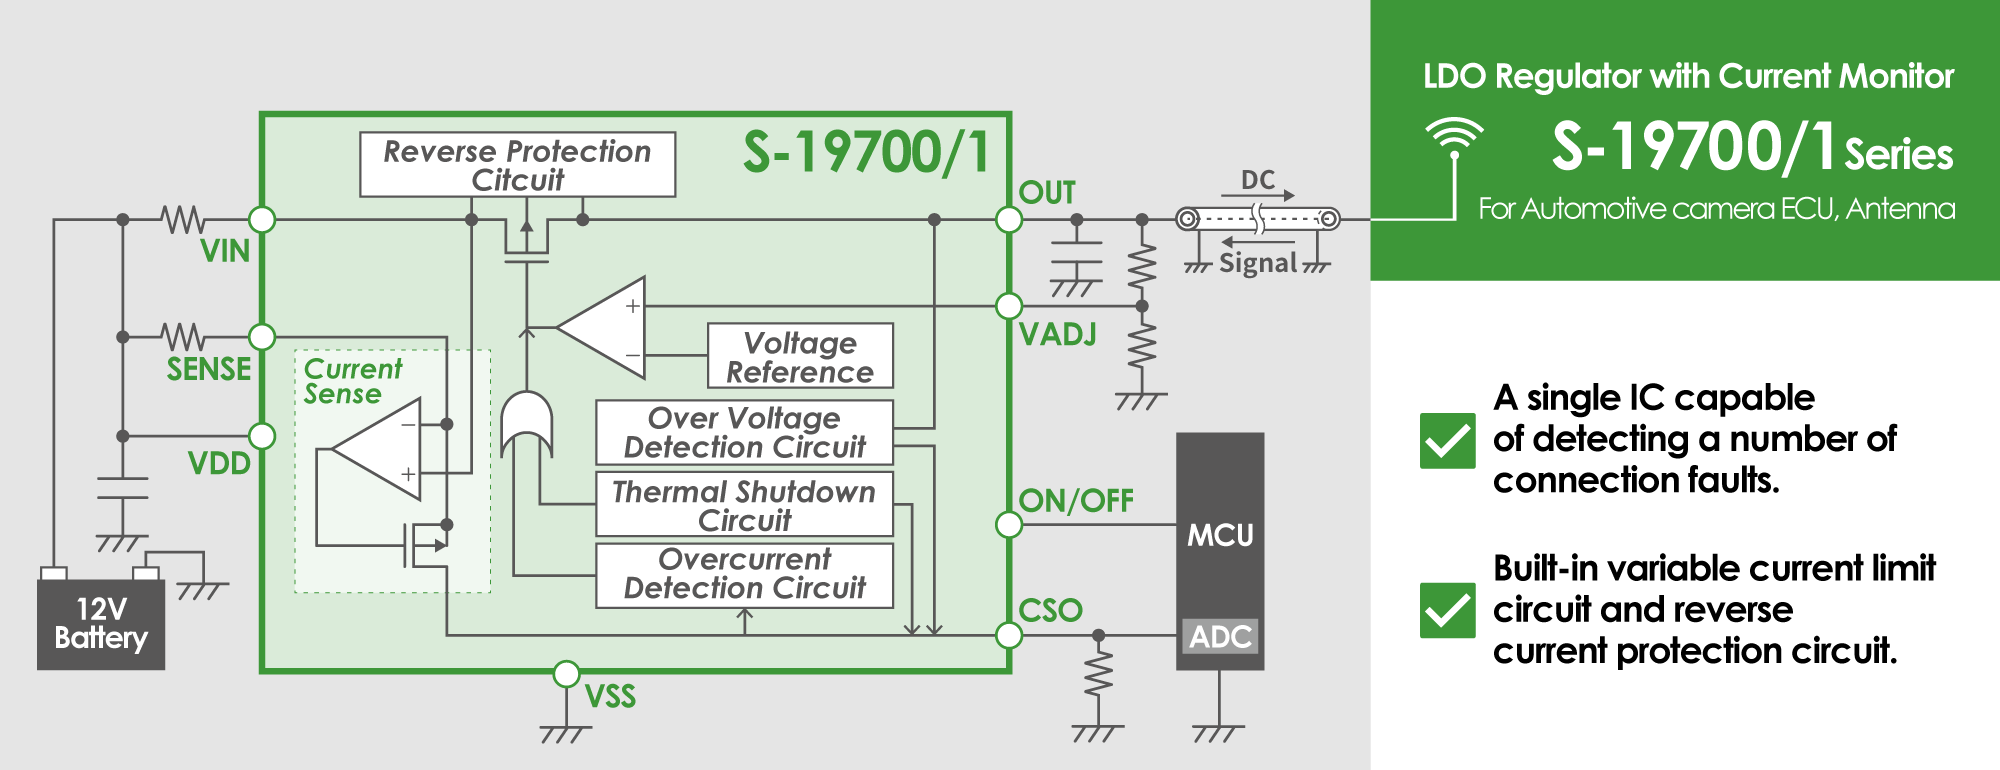 Automotive, 125°C Operation, 36 V Input, 400mA / 600 mA Voltage Regulator with Current Monitor And Adjustable Current Limit S-19700/1 Series